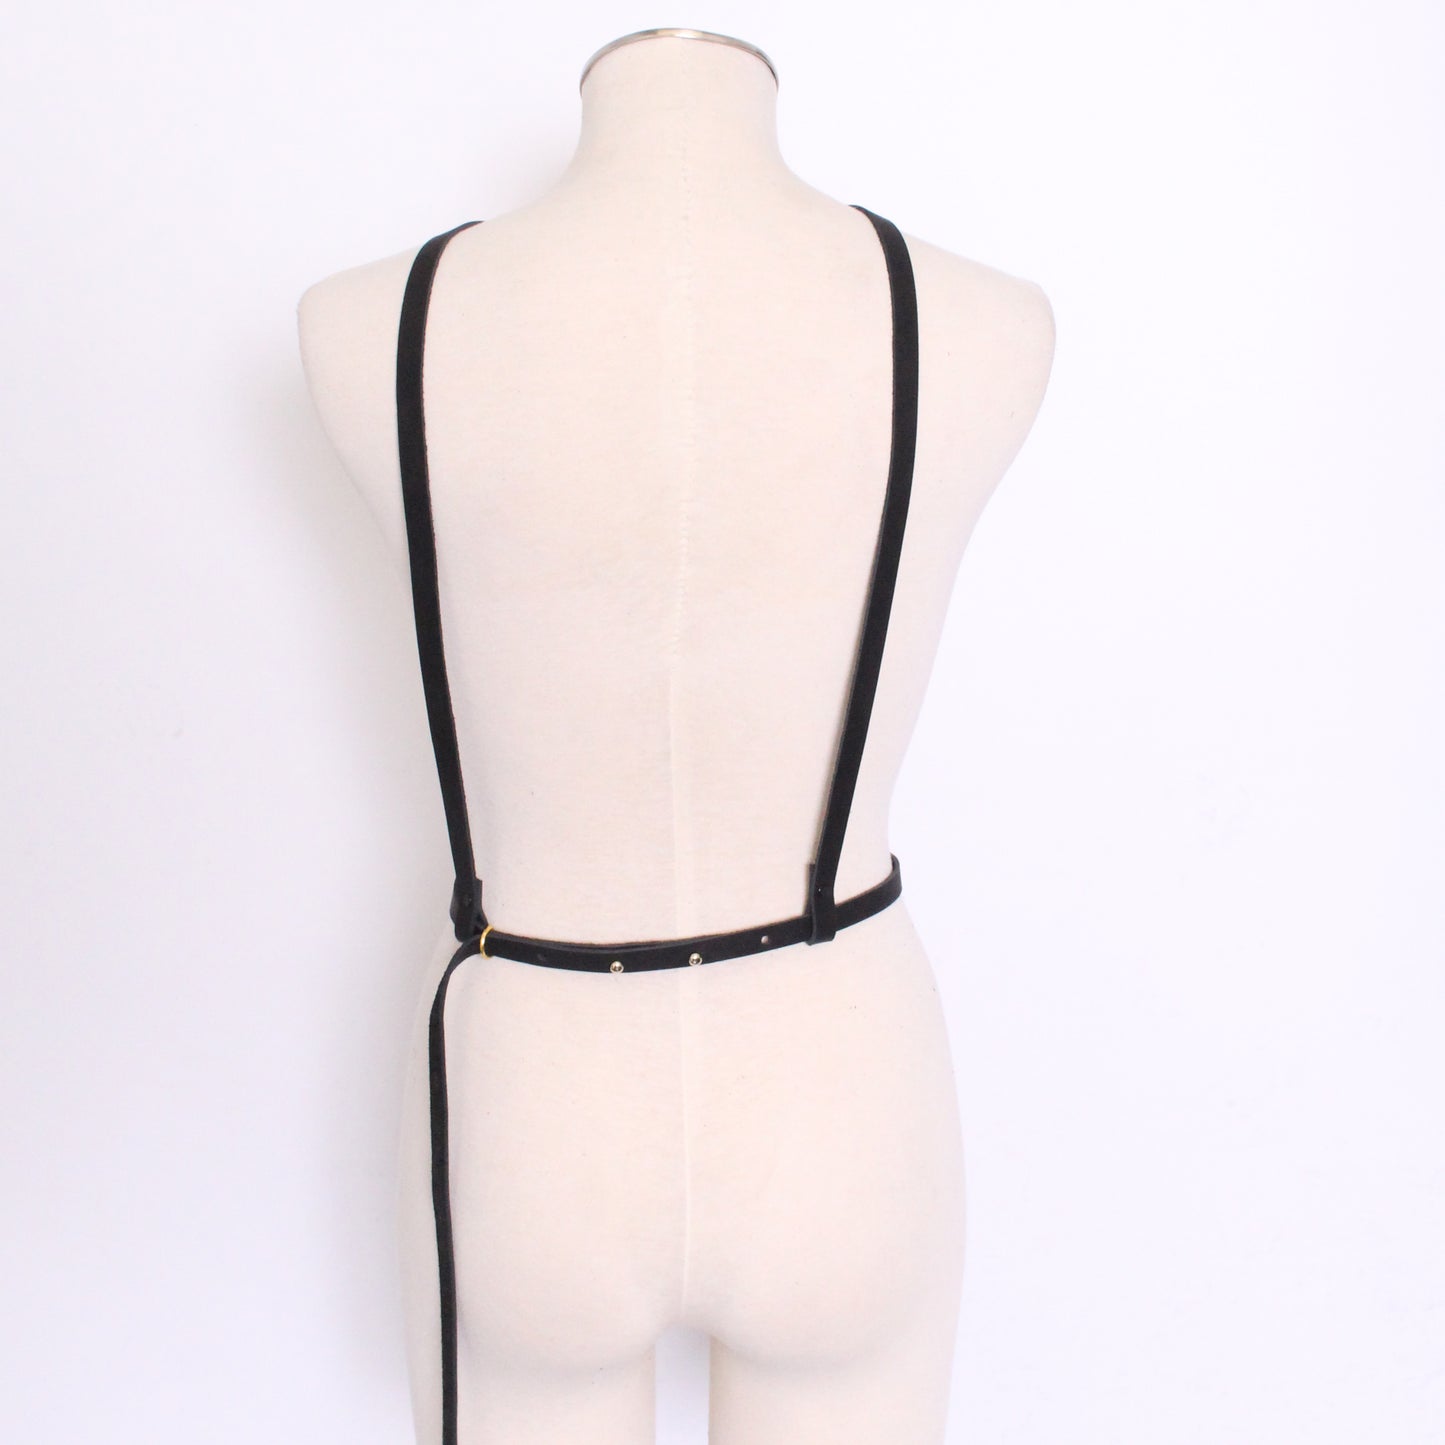 Reversible O-Ring Harness